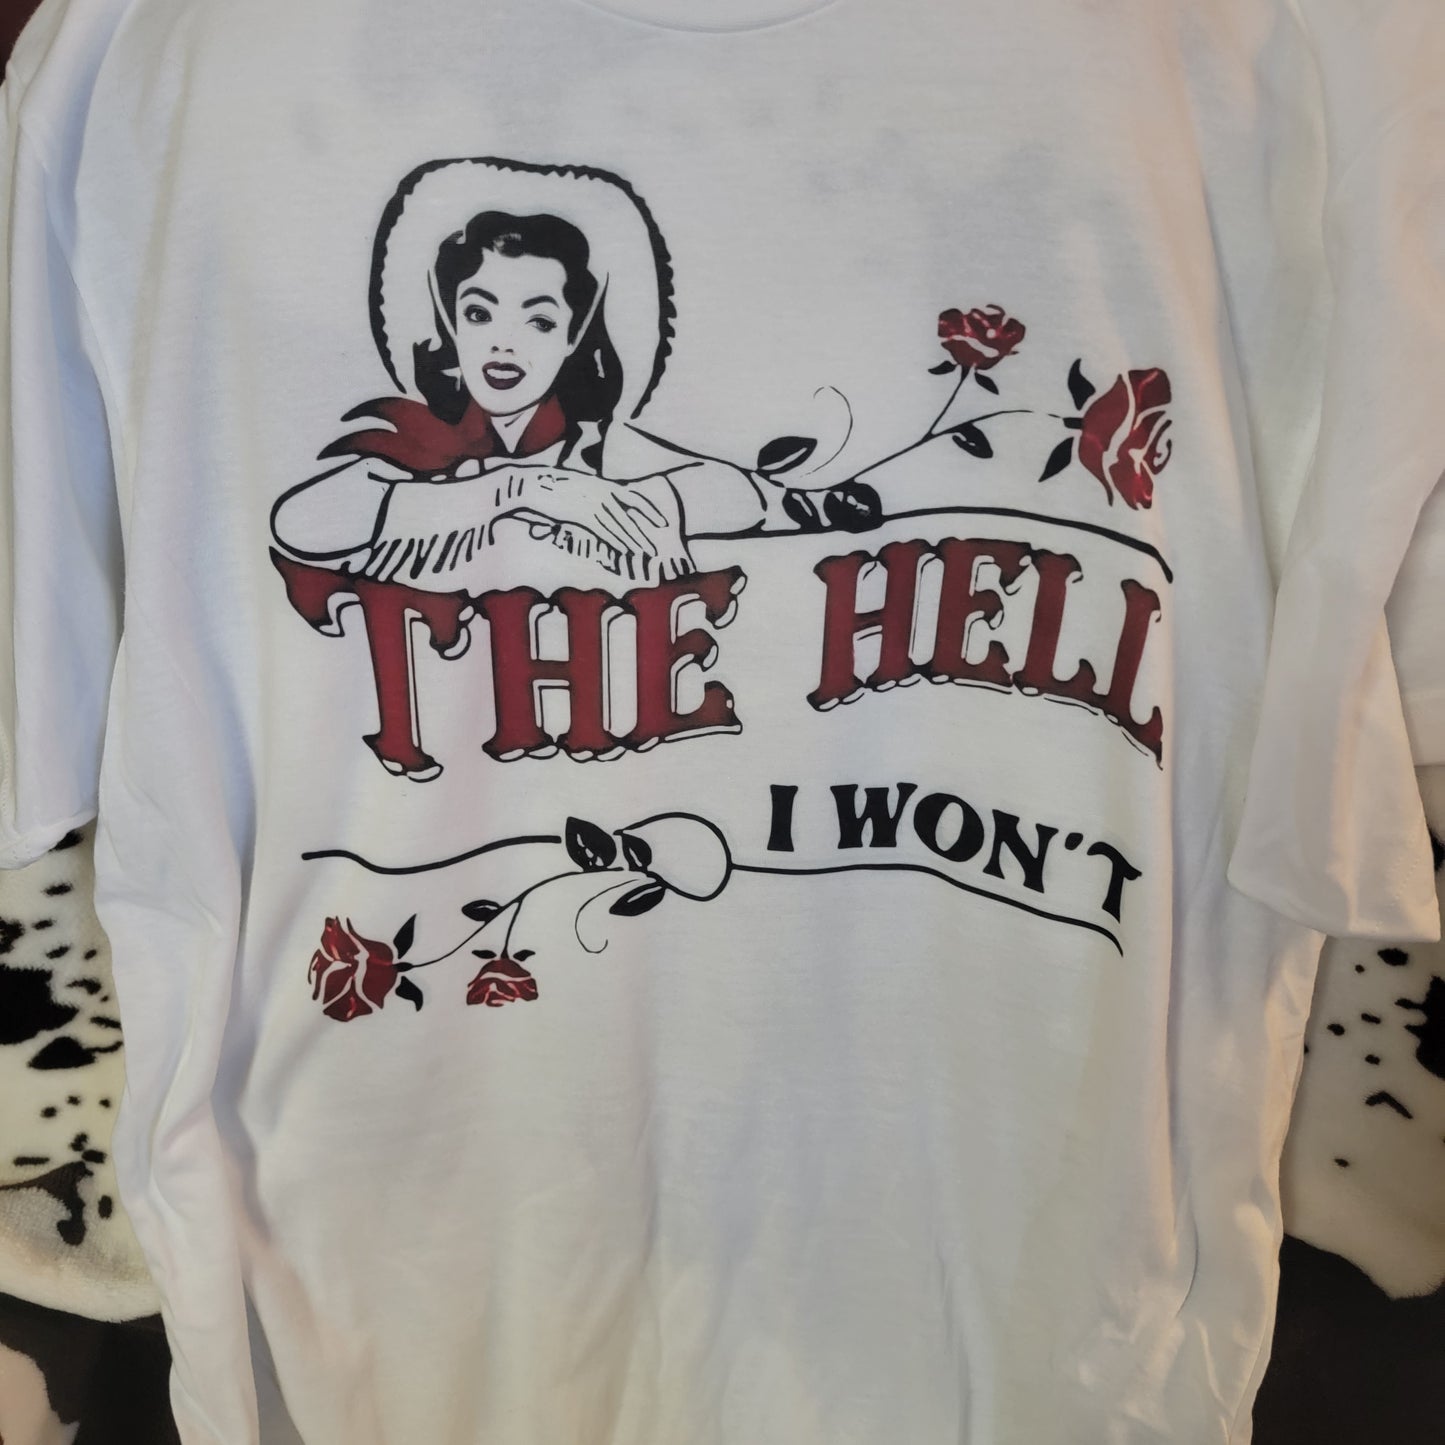 The Hell I Want Western Graphic Tee Shirt